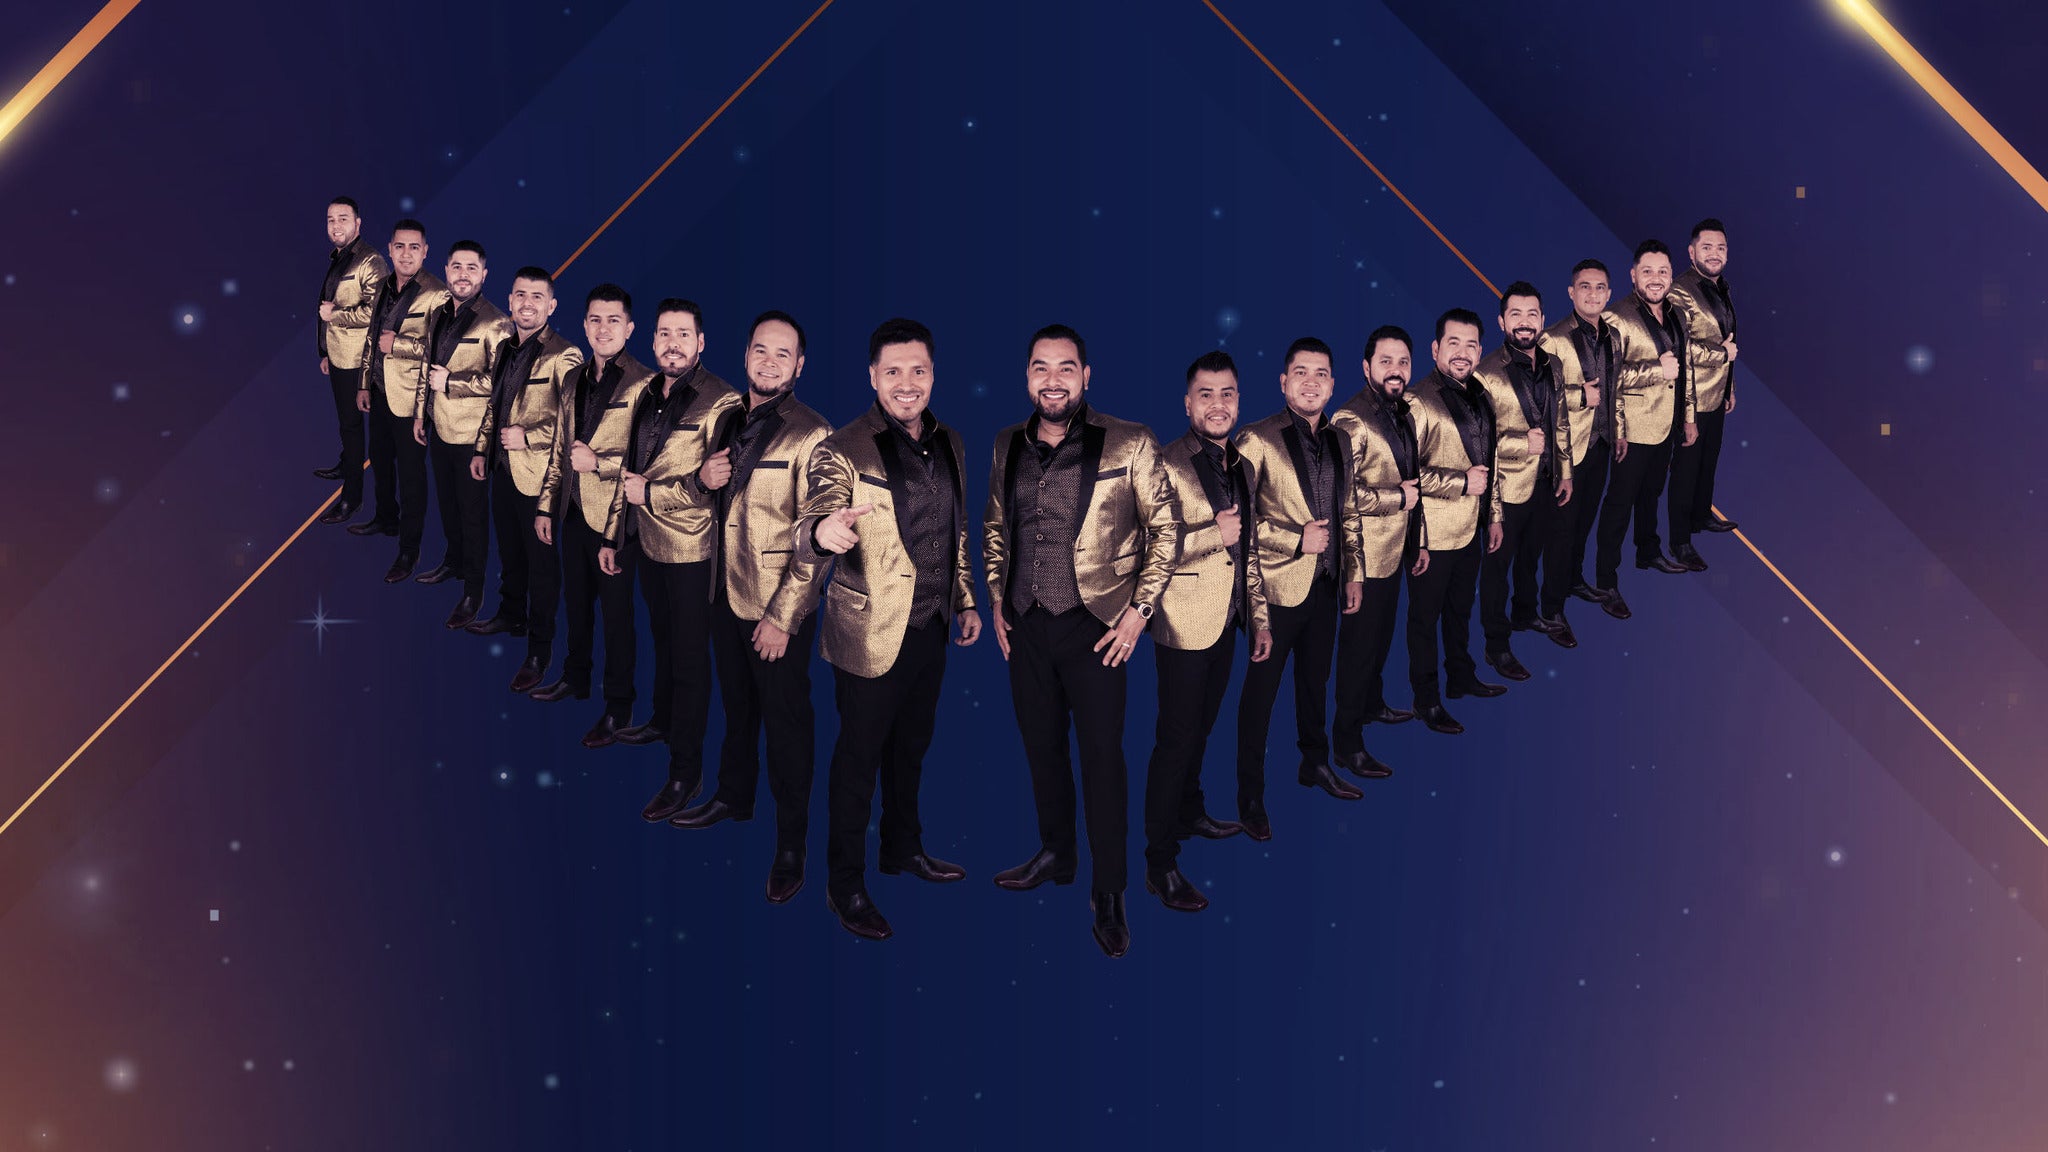 Banda MS presale code for show tickets in El Paso, TX (Don Haskins Center)